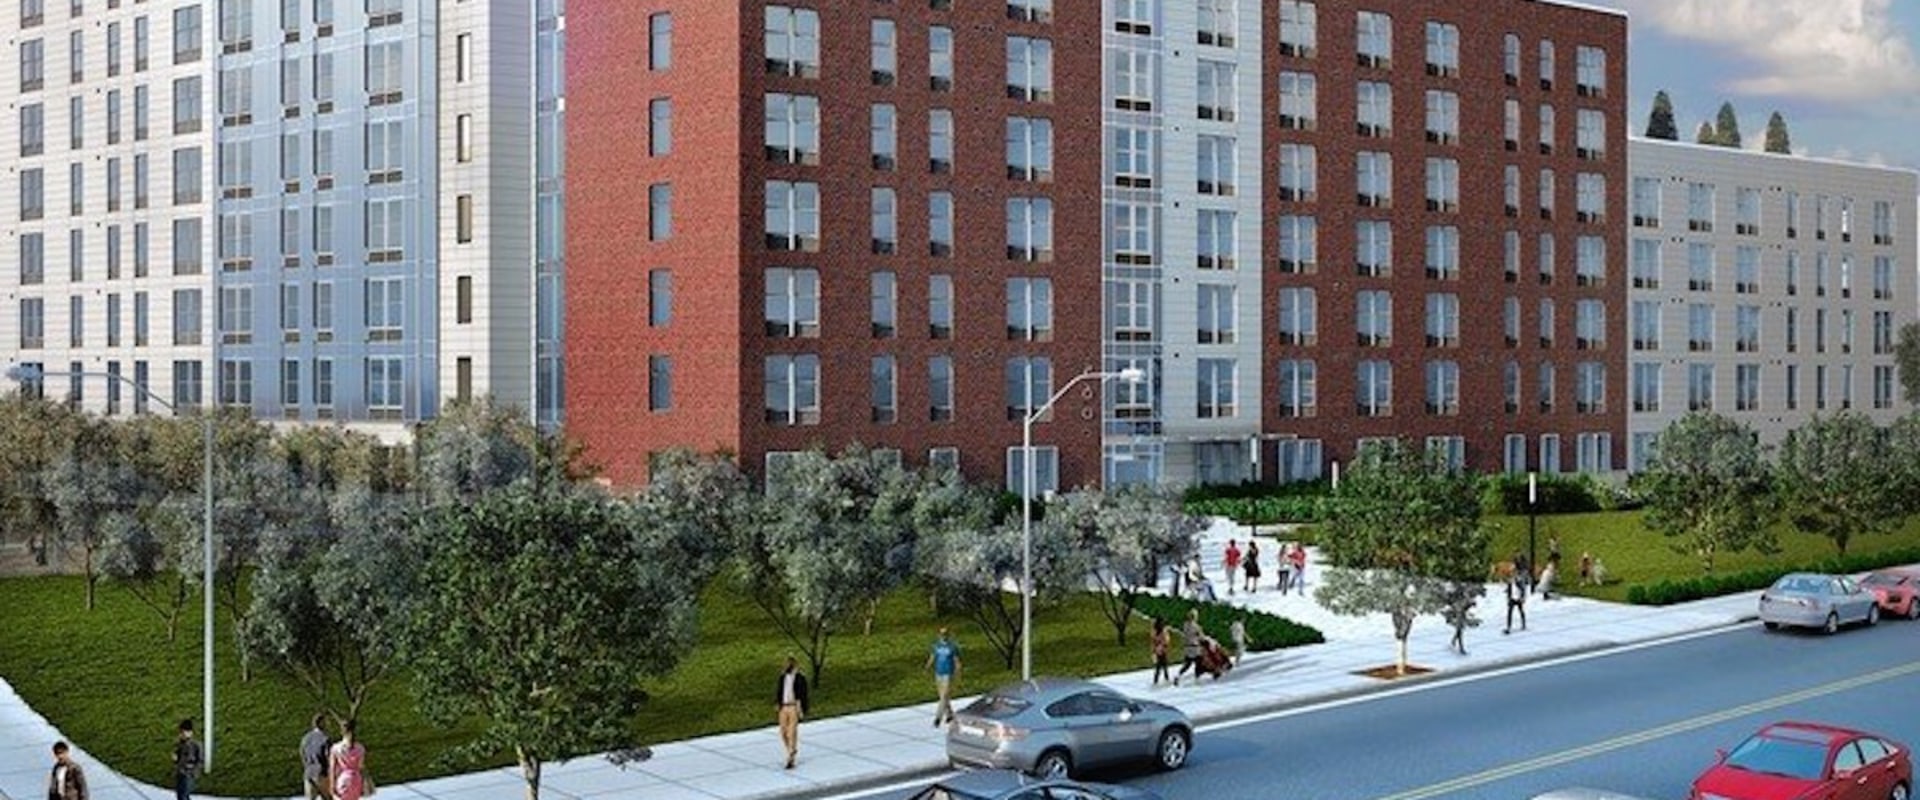 Affordable Housing Options in Brooklyn, NY